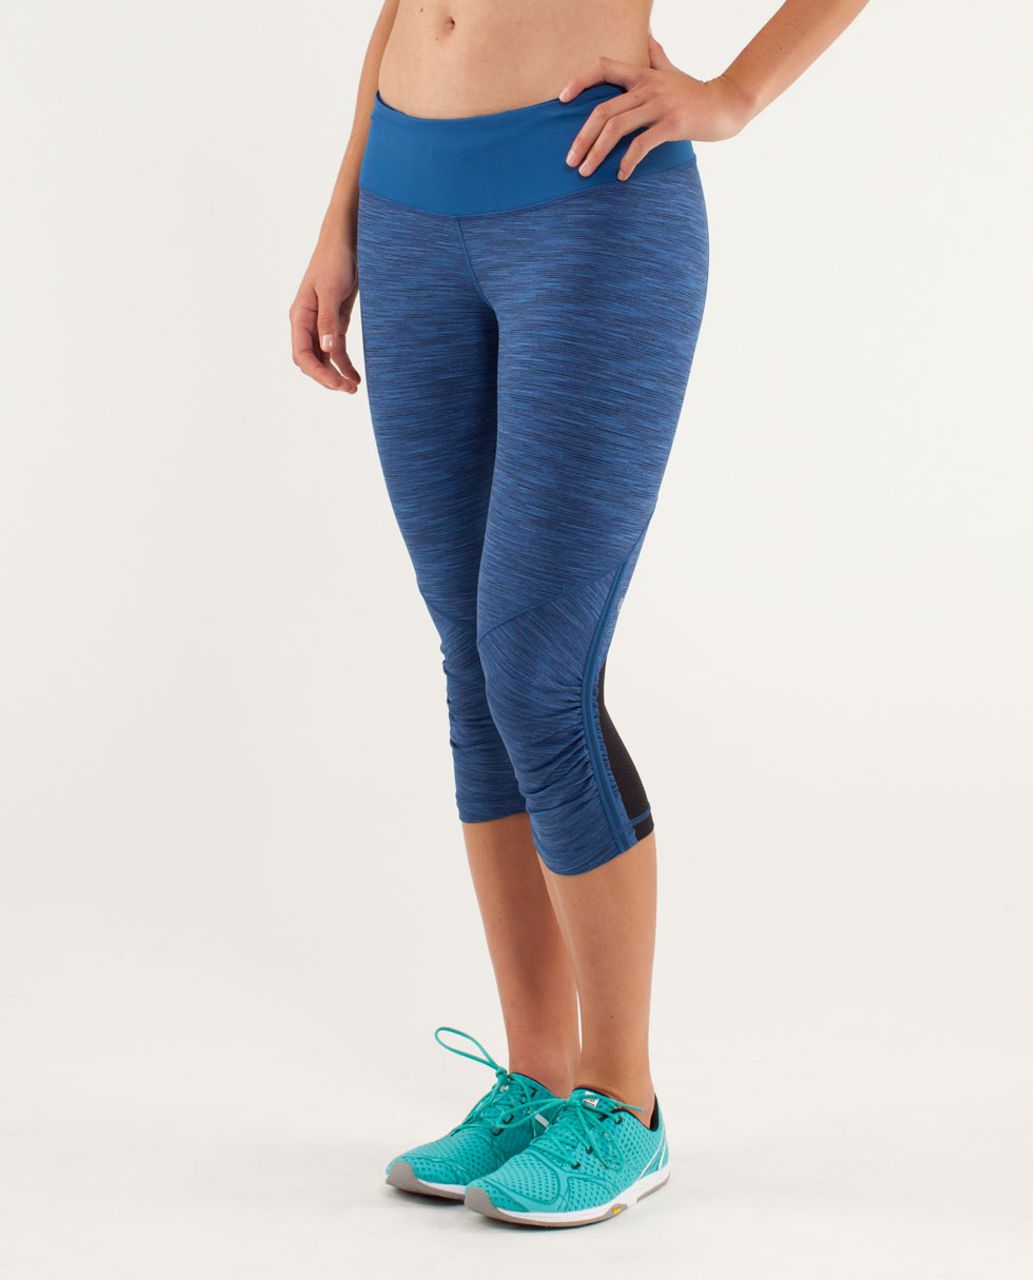 Lululemon Run:  For Your Life Crop - Wee Are From Space Limitless Blue Black / Limitless Blue / Black